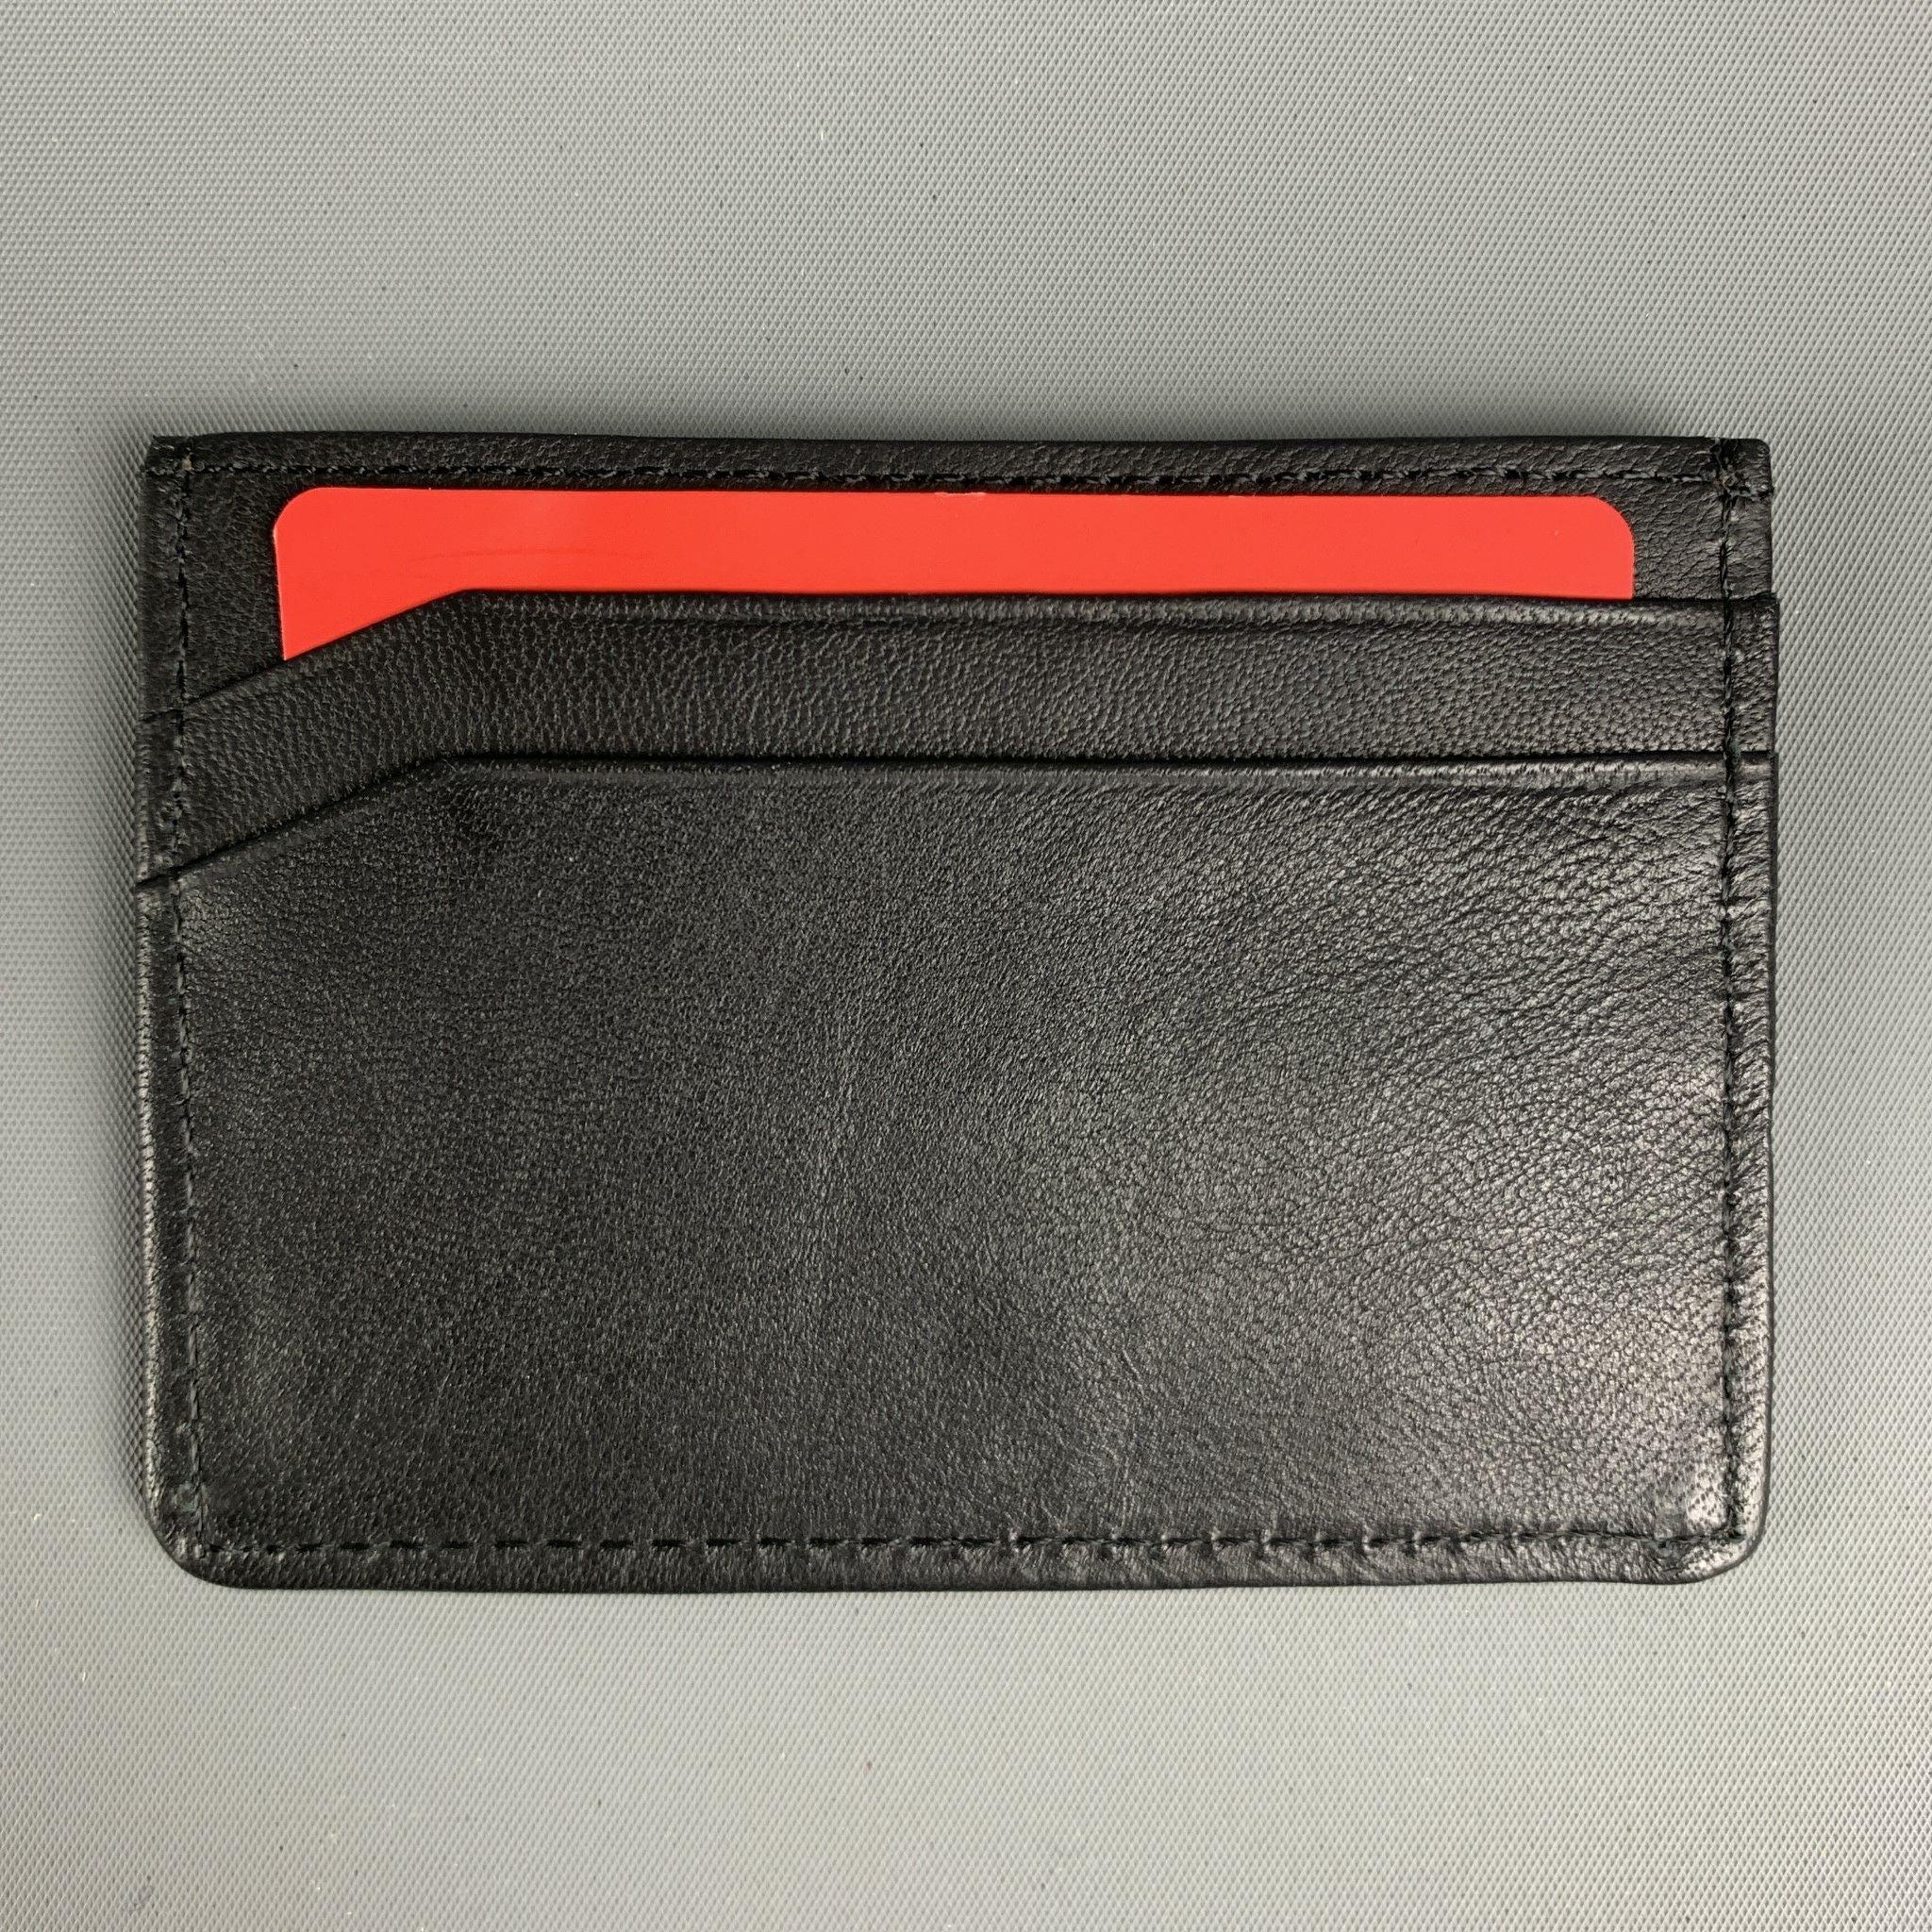 HUGO BOSS Black Leather Wallet In Excellent Condition For Sale In San Francisco, CA